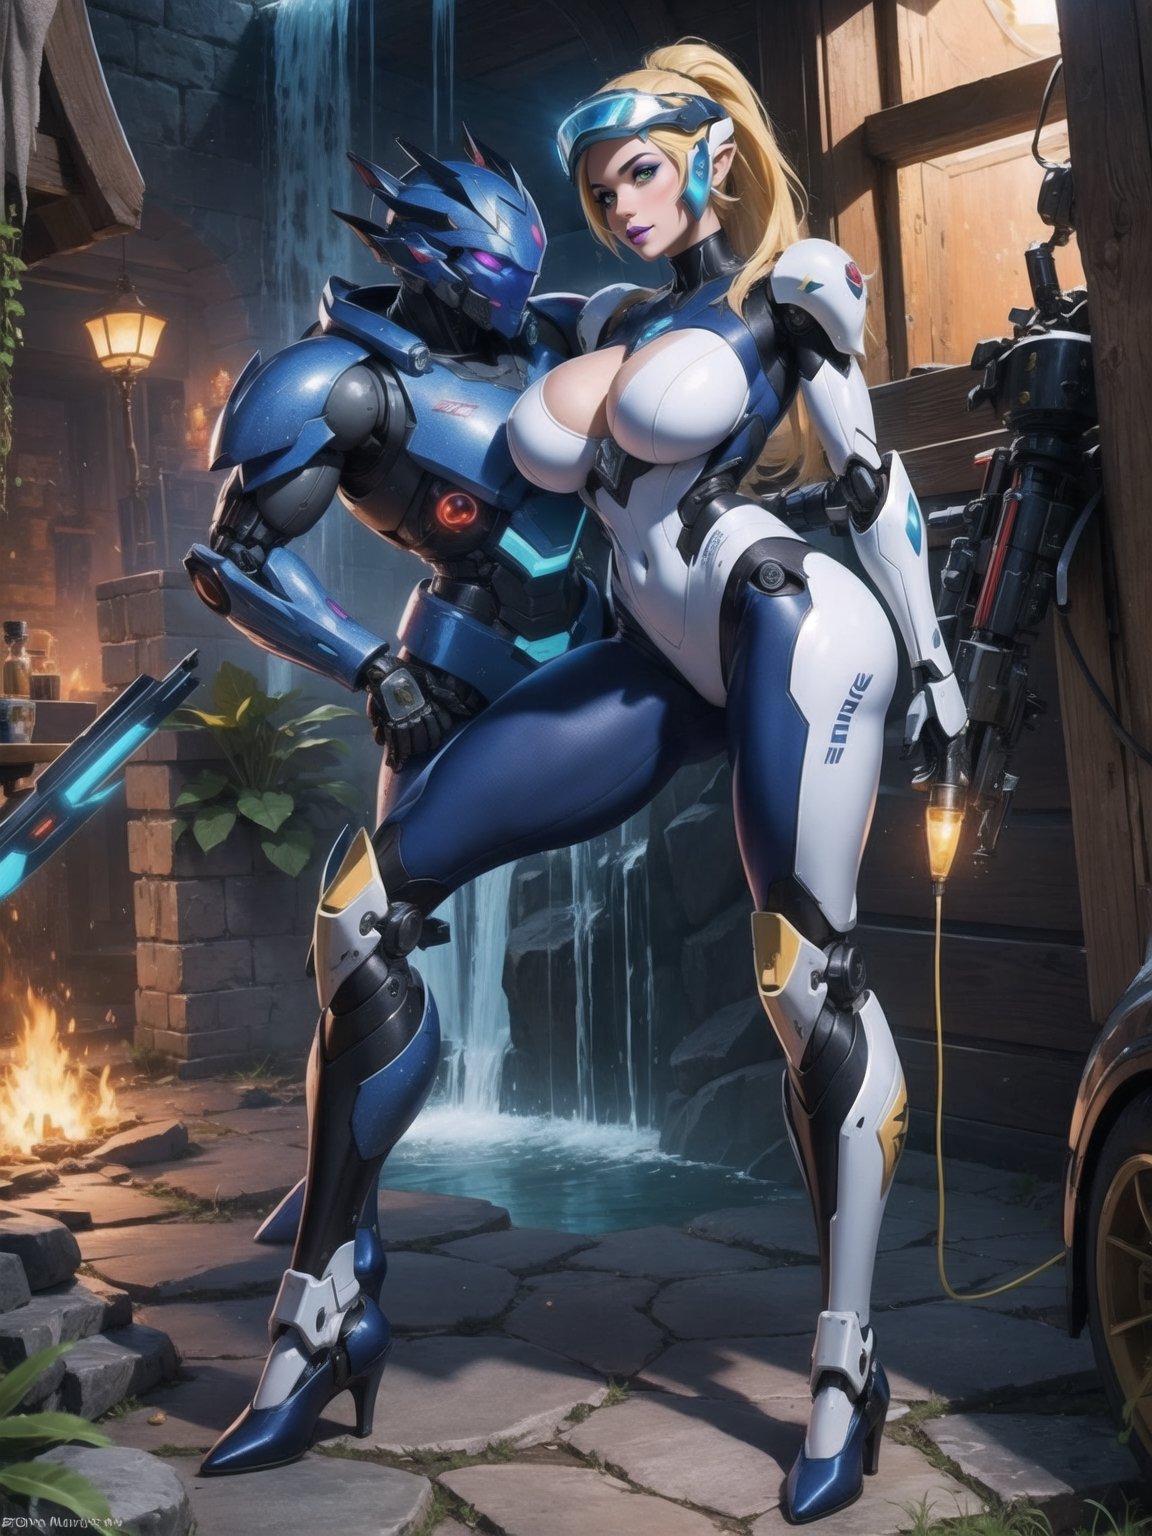 Solo female, ((wearing mecha suit+robotic suit completely white, with blue parts, more yellow lights, suit with attached weapons, gigantic breasts, wearing cybernetic helmet with visor)), mohawk hair, blue hair, messy hair, hair with ponytail, looking directly at the viewer, she is, in a dungeon, with a waterfall, large stone altars, stone structures, machines, robots, large altars of ancient gods, figurines, Super Metroid, ultra technological, Zelda, Final Fantasy, worldofwarcraft, UHD, best possible quality, ultra detailed, best possible resolution, Unreal Engine 5, professional photography, she is (((sensual pose with interaction and leaning on anything+object+on something+leaning against))), better_hands, (full body), More detail